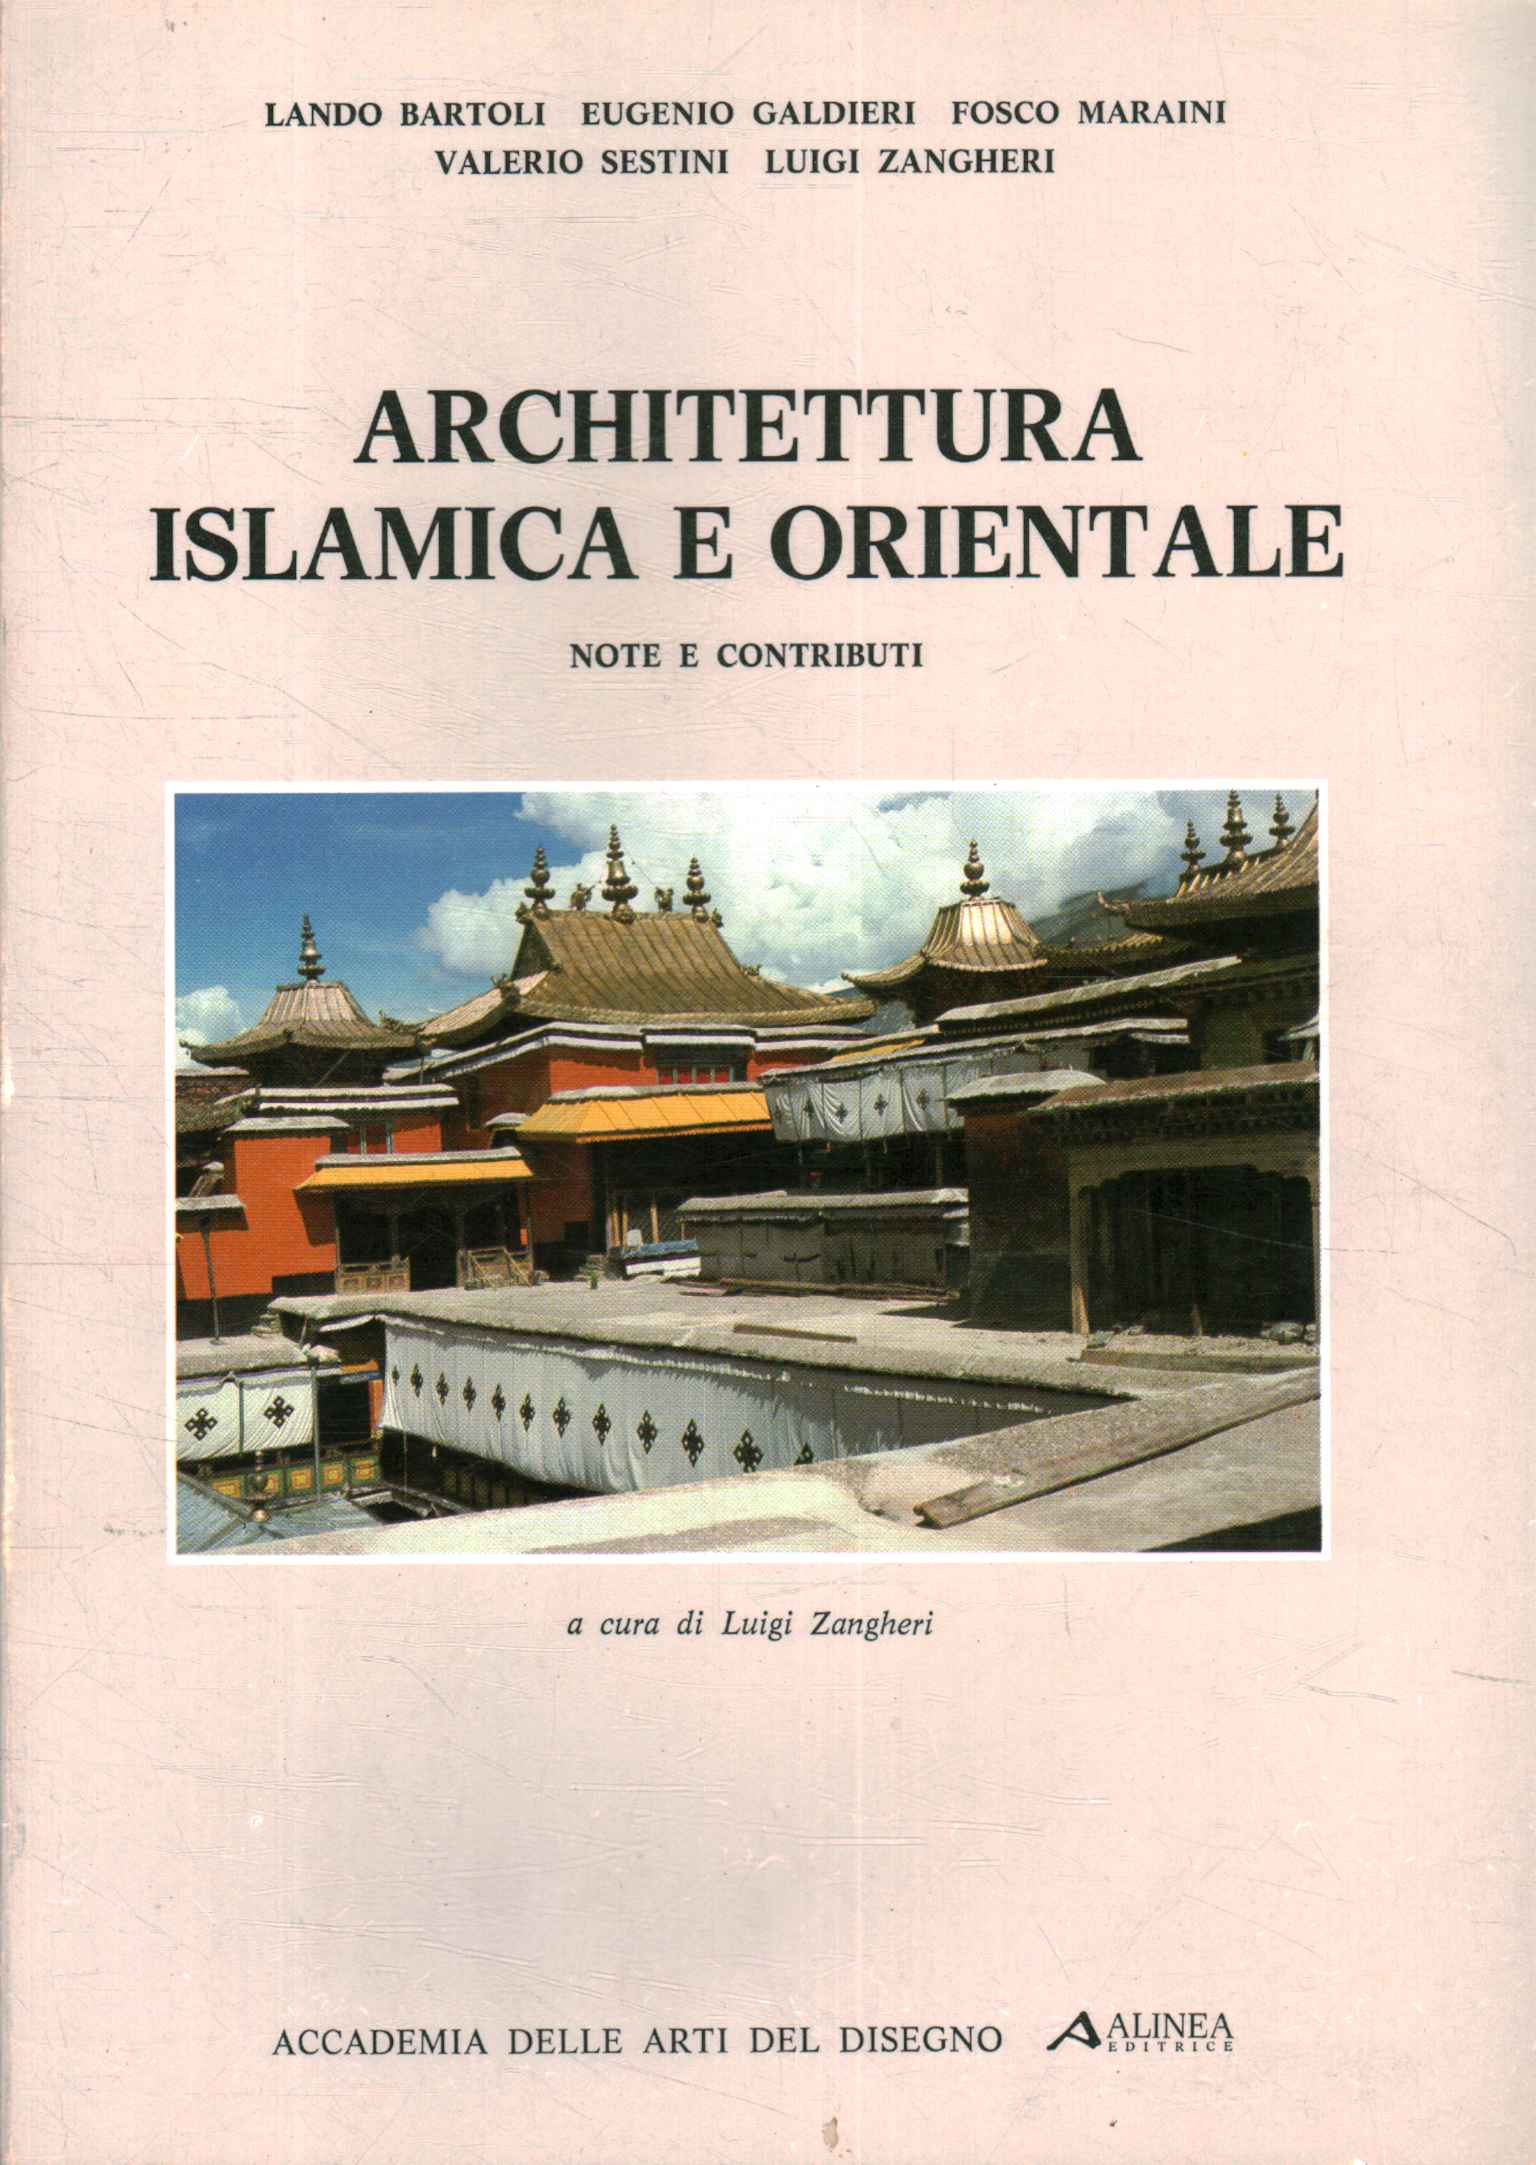 Islamic and oriental architecture